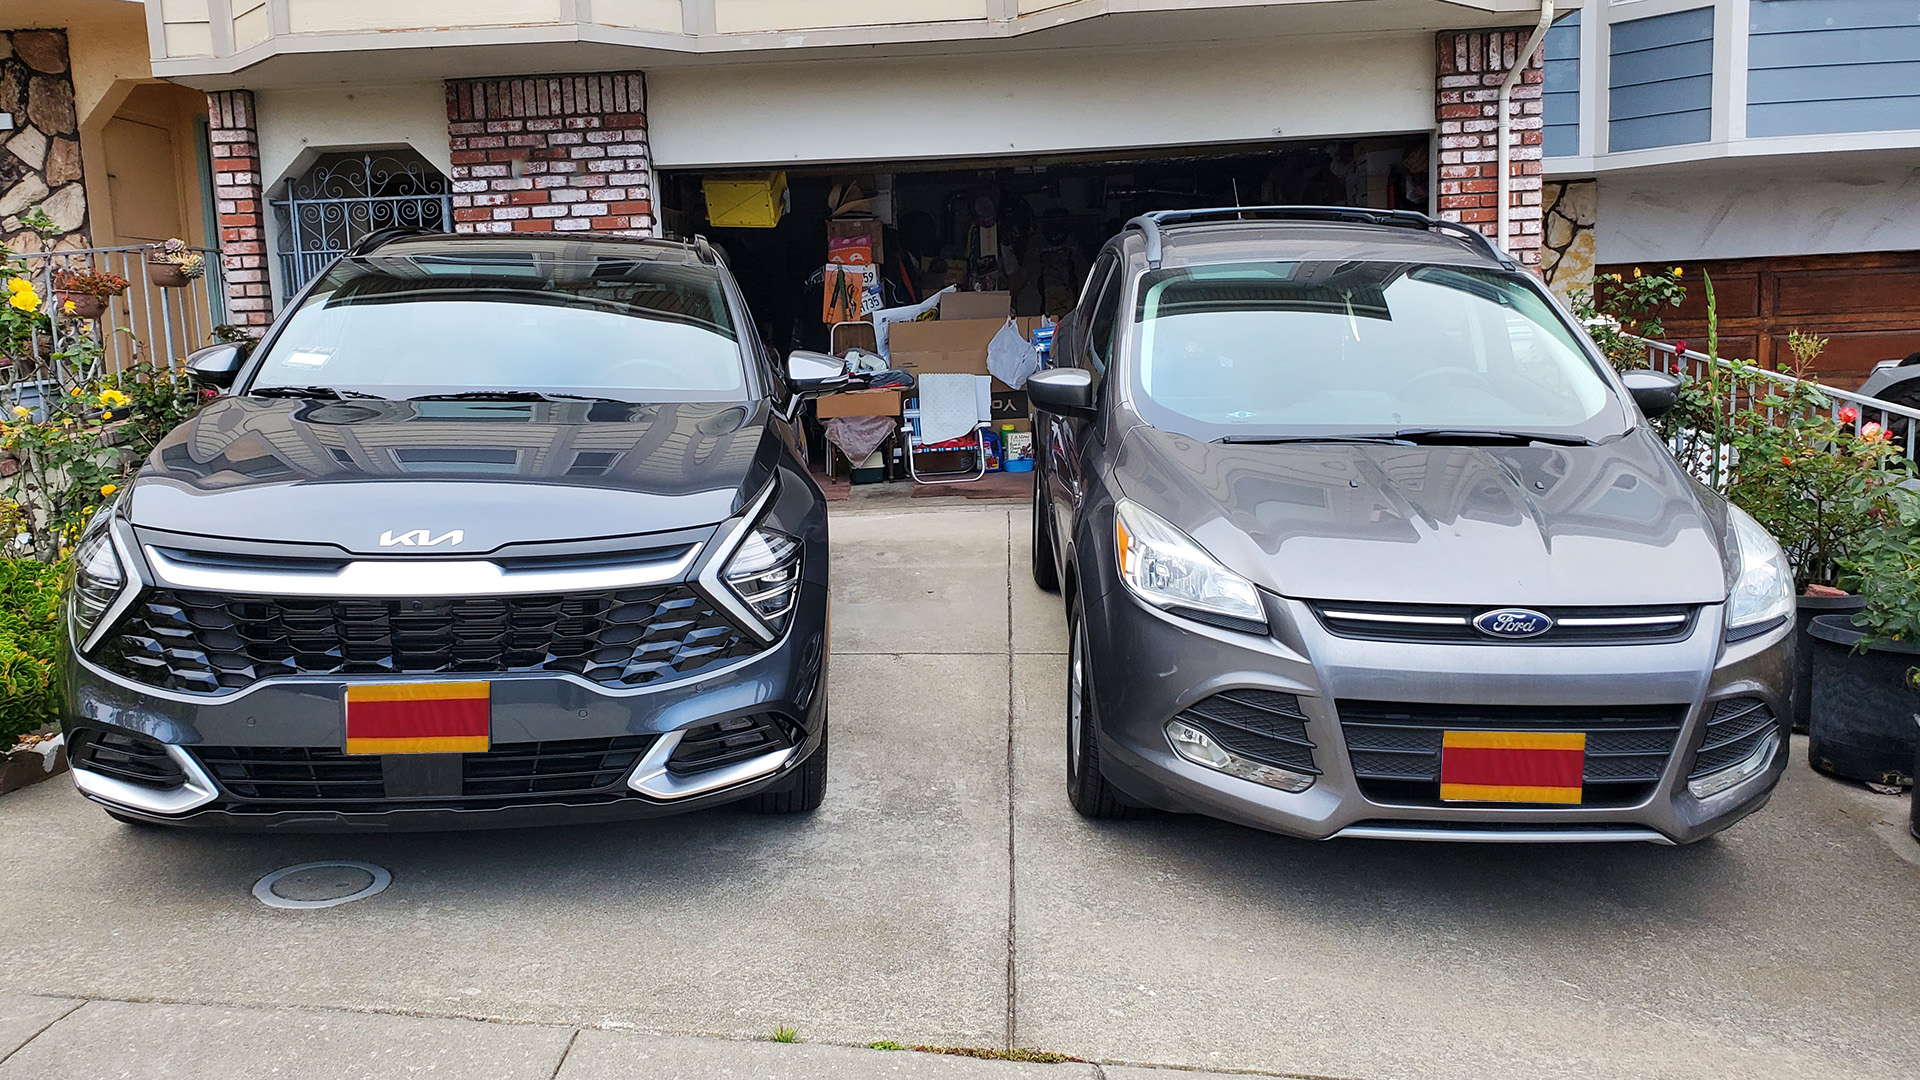 The Amazing Race Made Me Buy Two Cars!